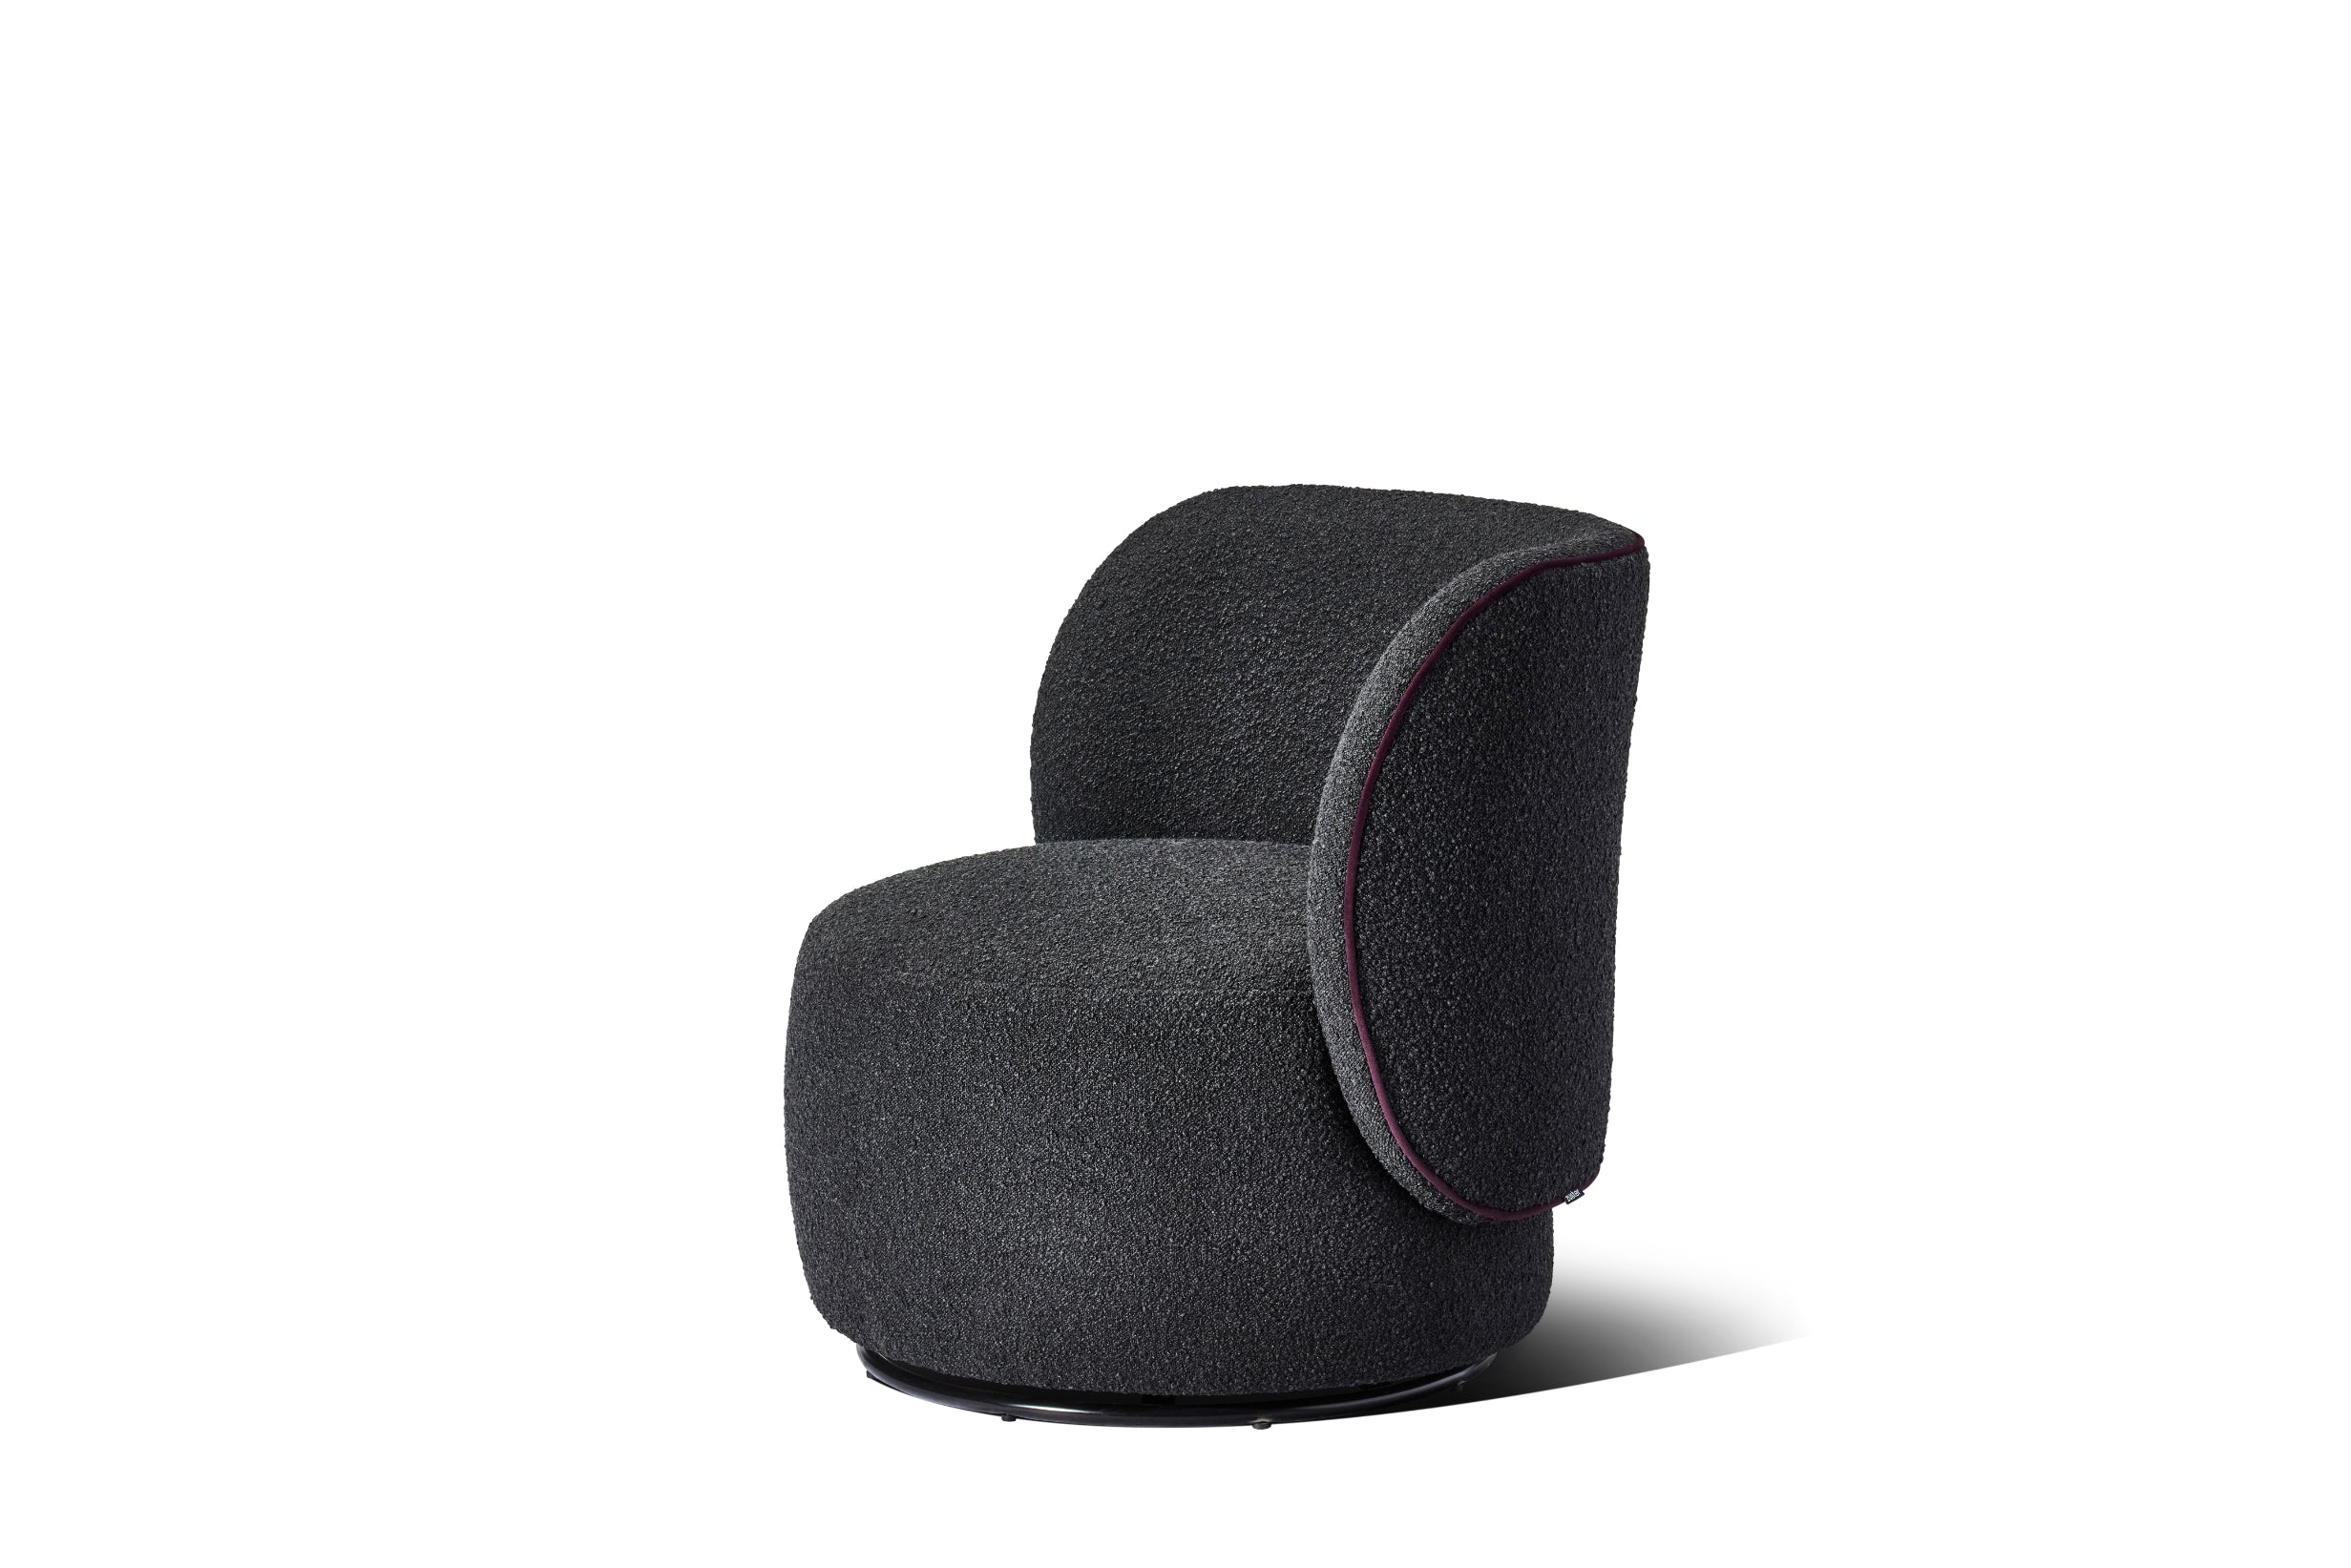 Tulip Swivel Armchair - Tweed Dusk Eve with Berry Piping - Zuster Furniture